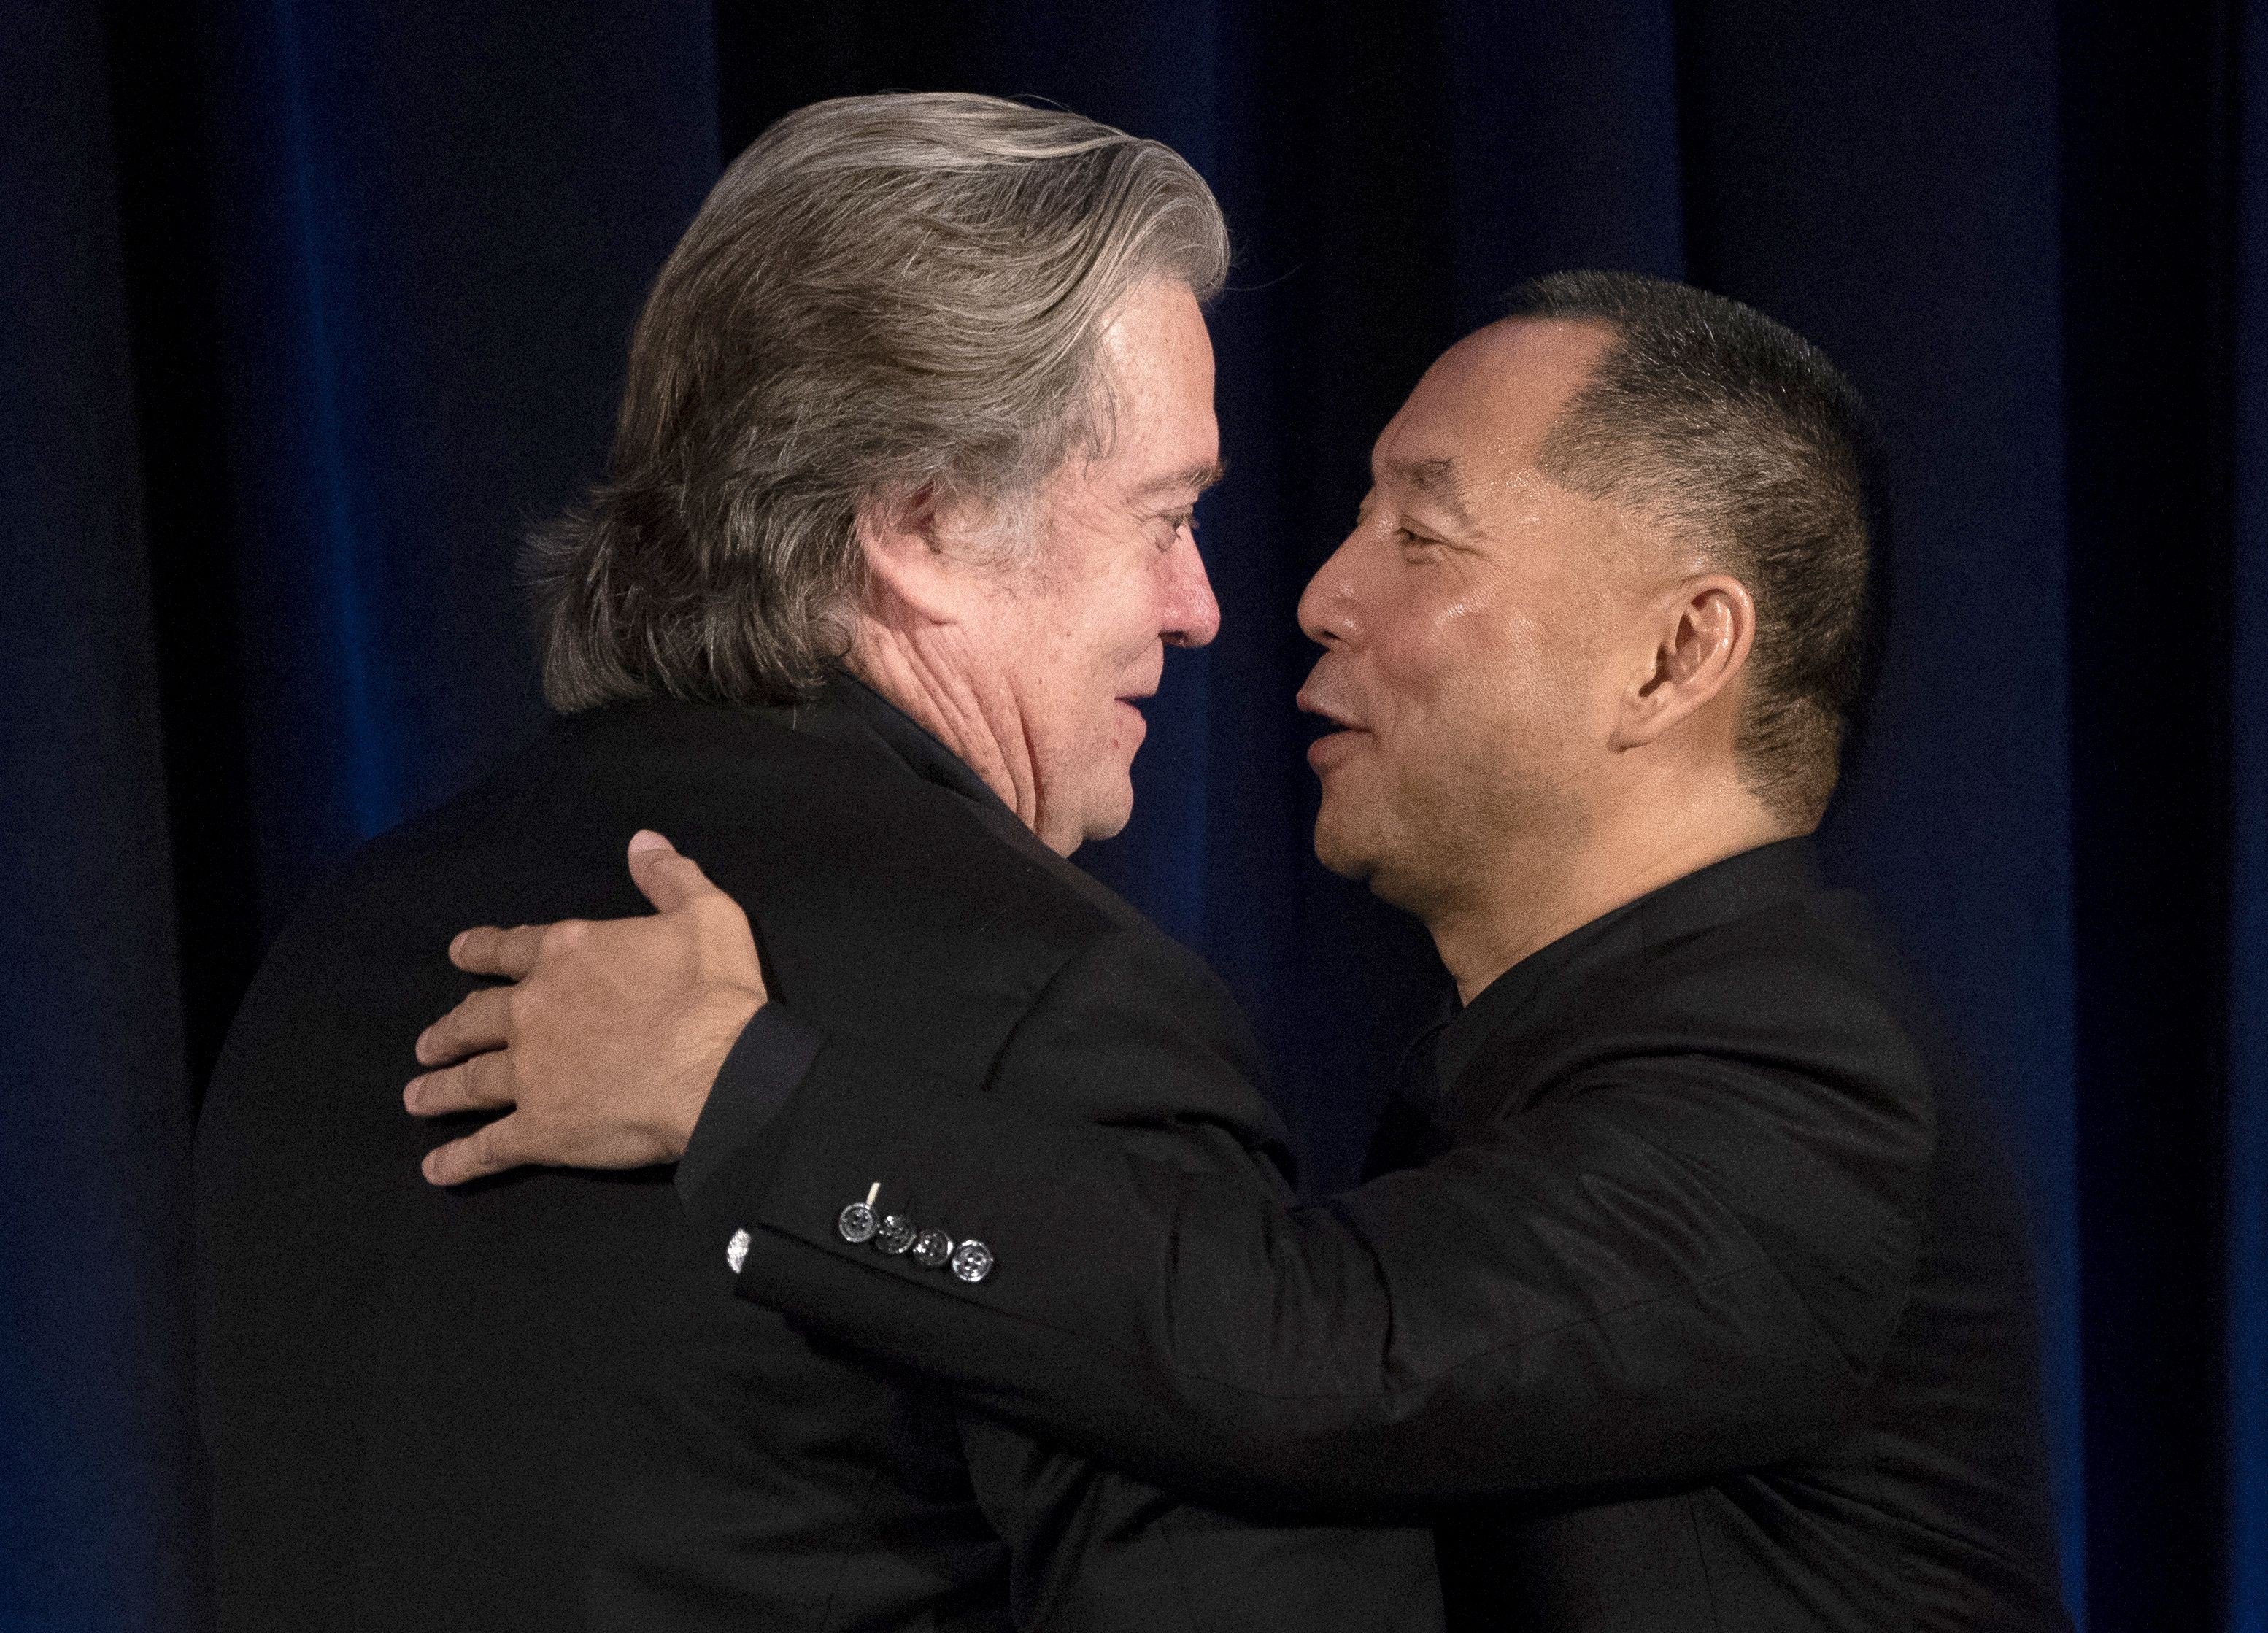 Former White House chief strategist Steve Bannon greets fugitive Chinese billionaire Guo Wengui before introducing him at a news conference on November 20 in New York. Photo: AFP